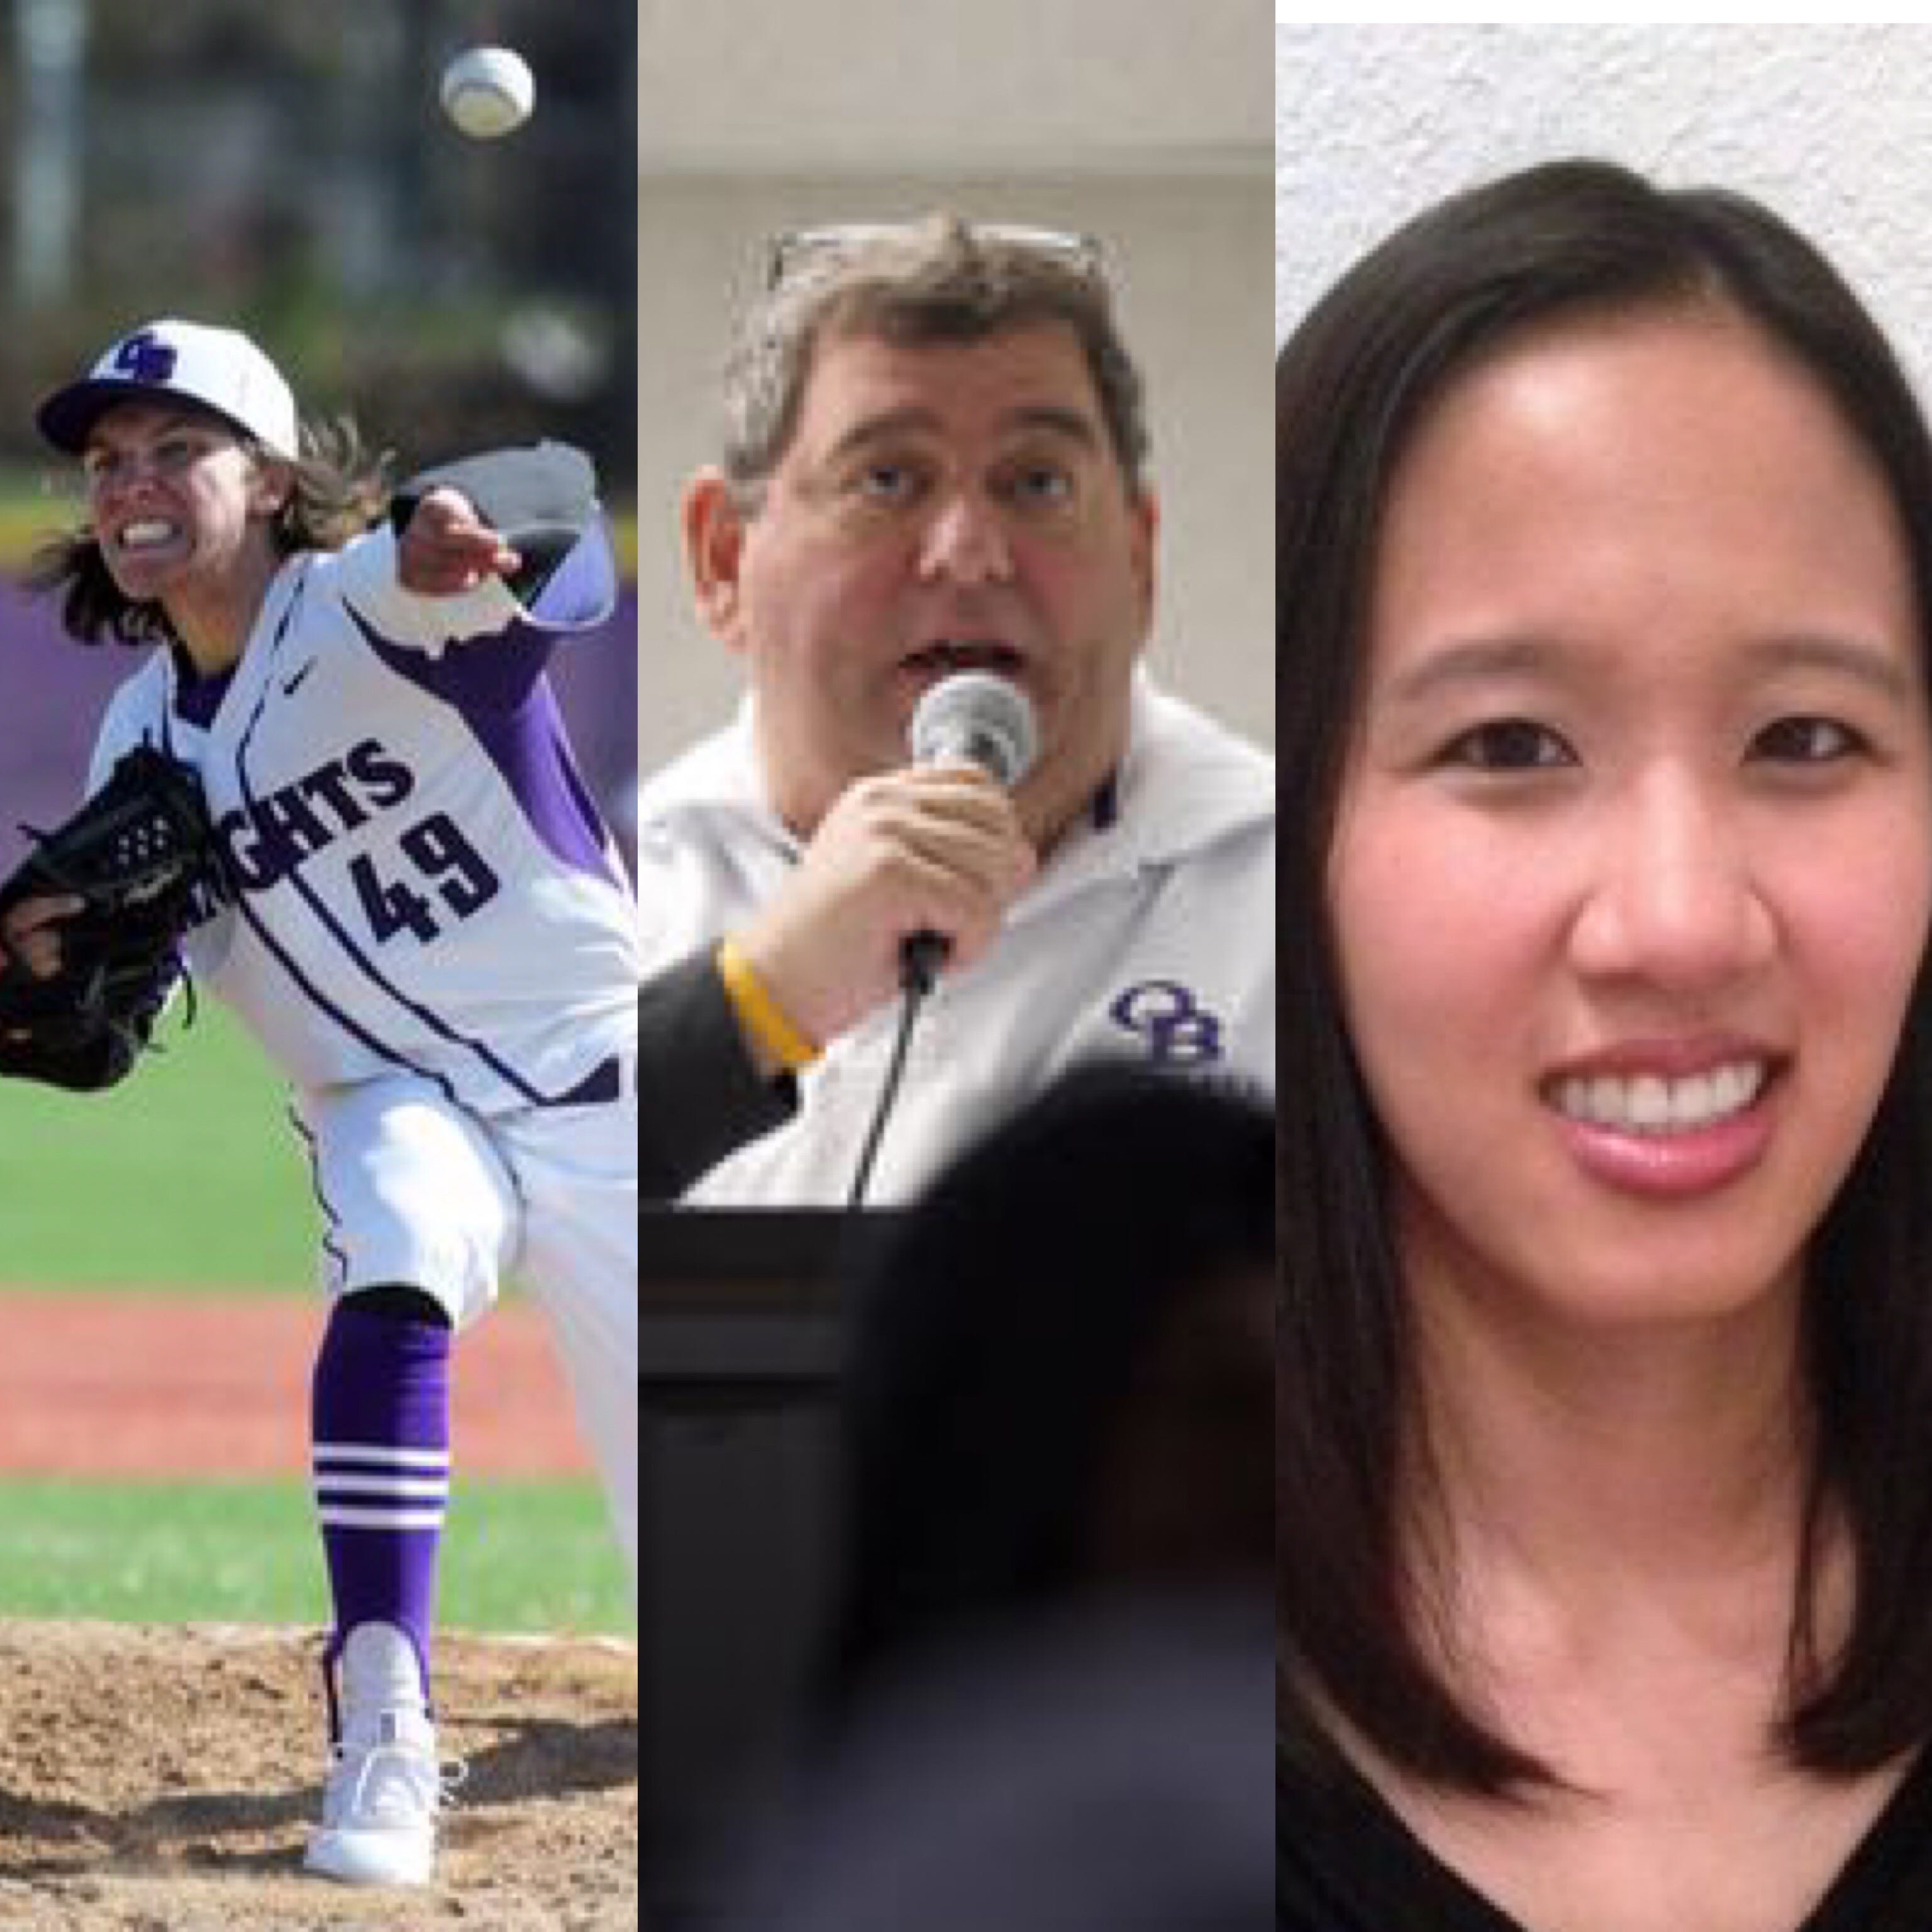 Zach Attianese, Ron Mazzola and Natalie Leong were inducted to the Old Bridge Wall of Fame on Monday night